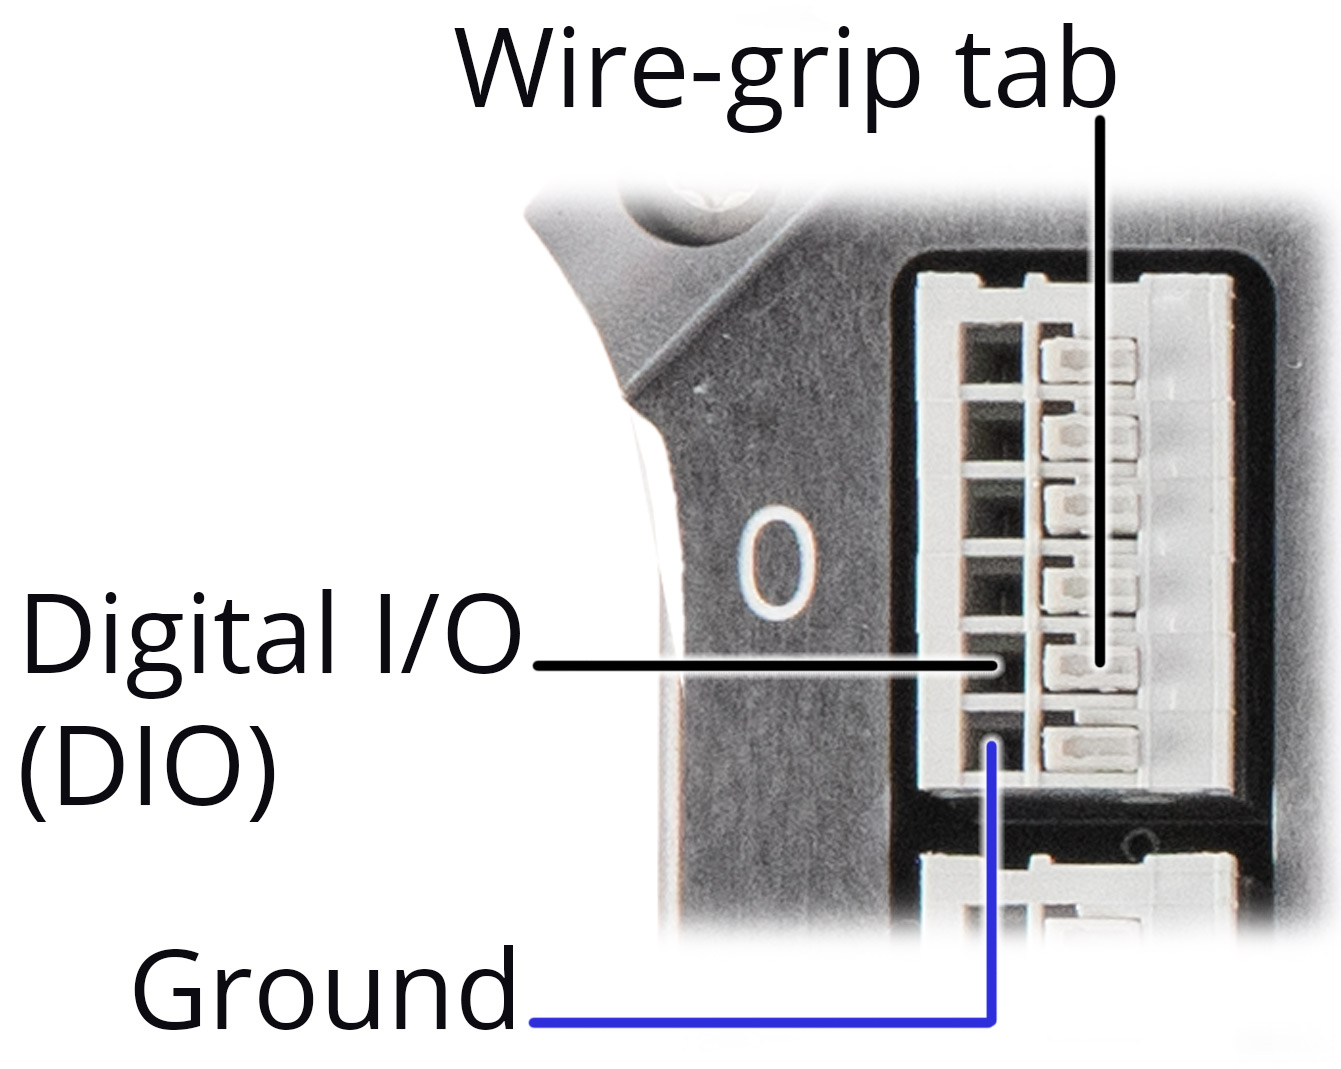 Image: Inset on terminal block of Sync Accessory Box with digital pins identified.